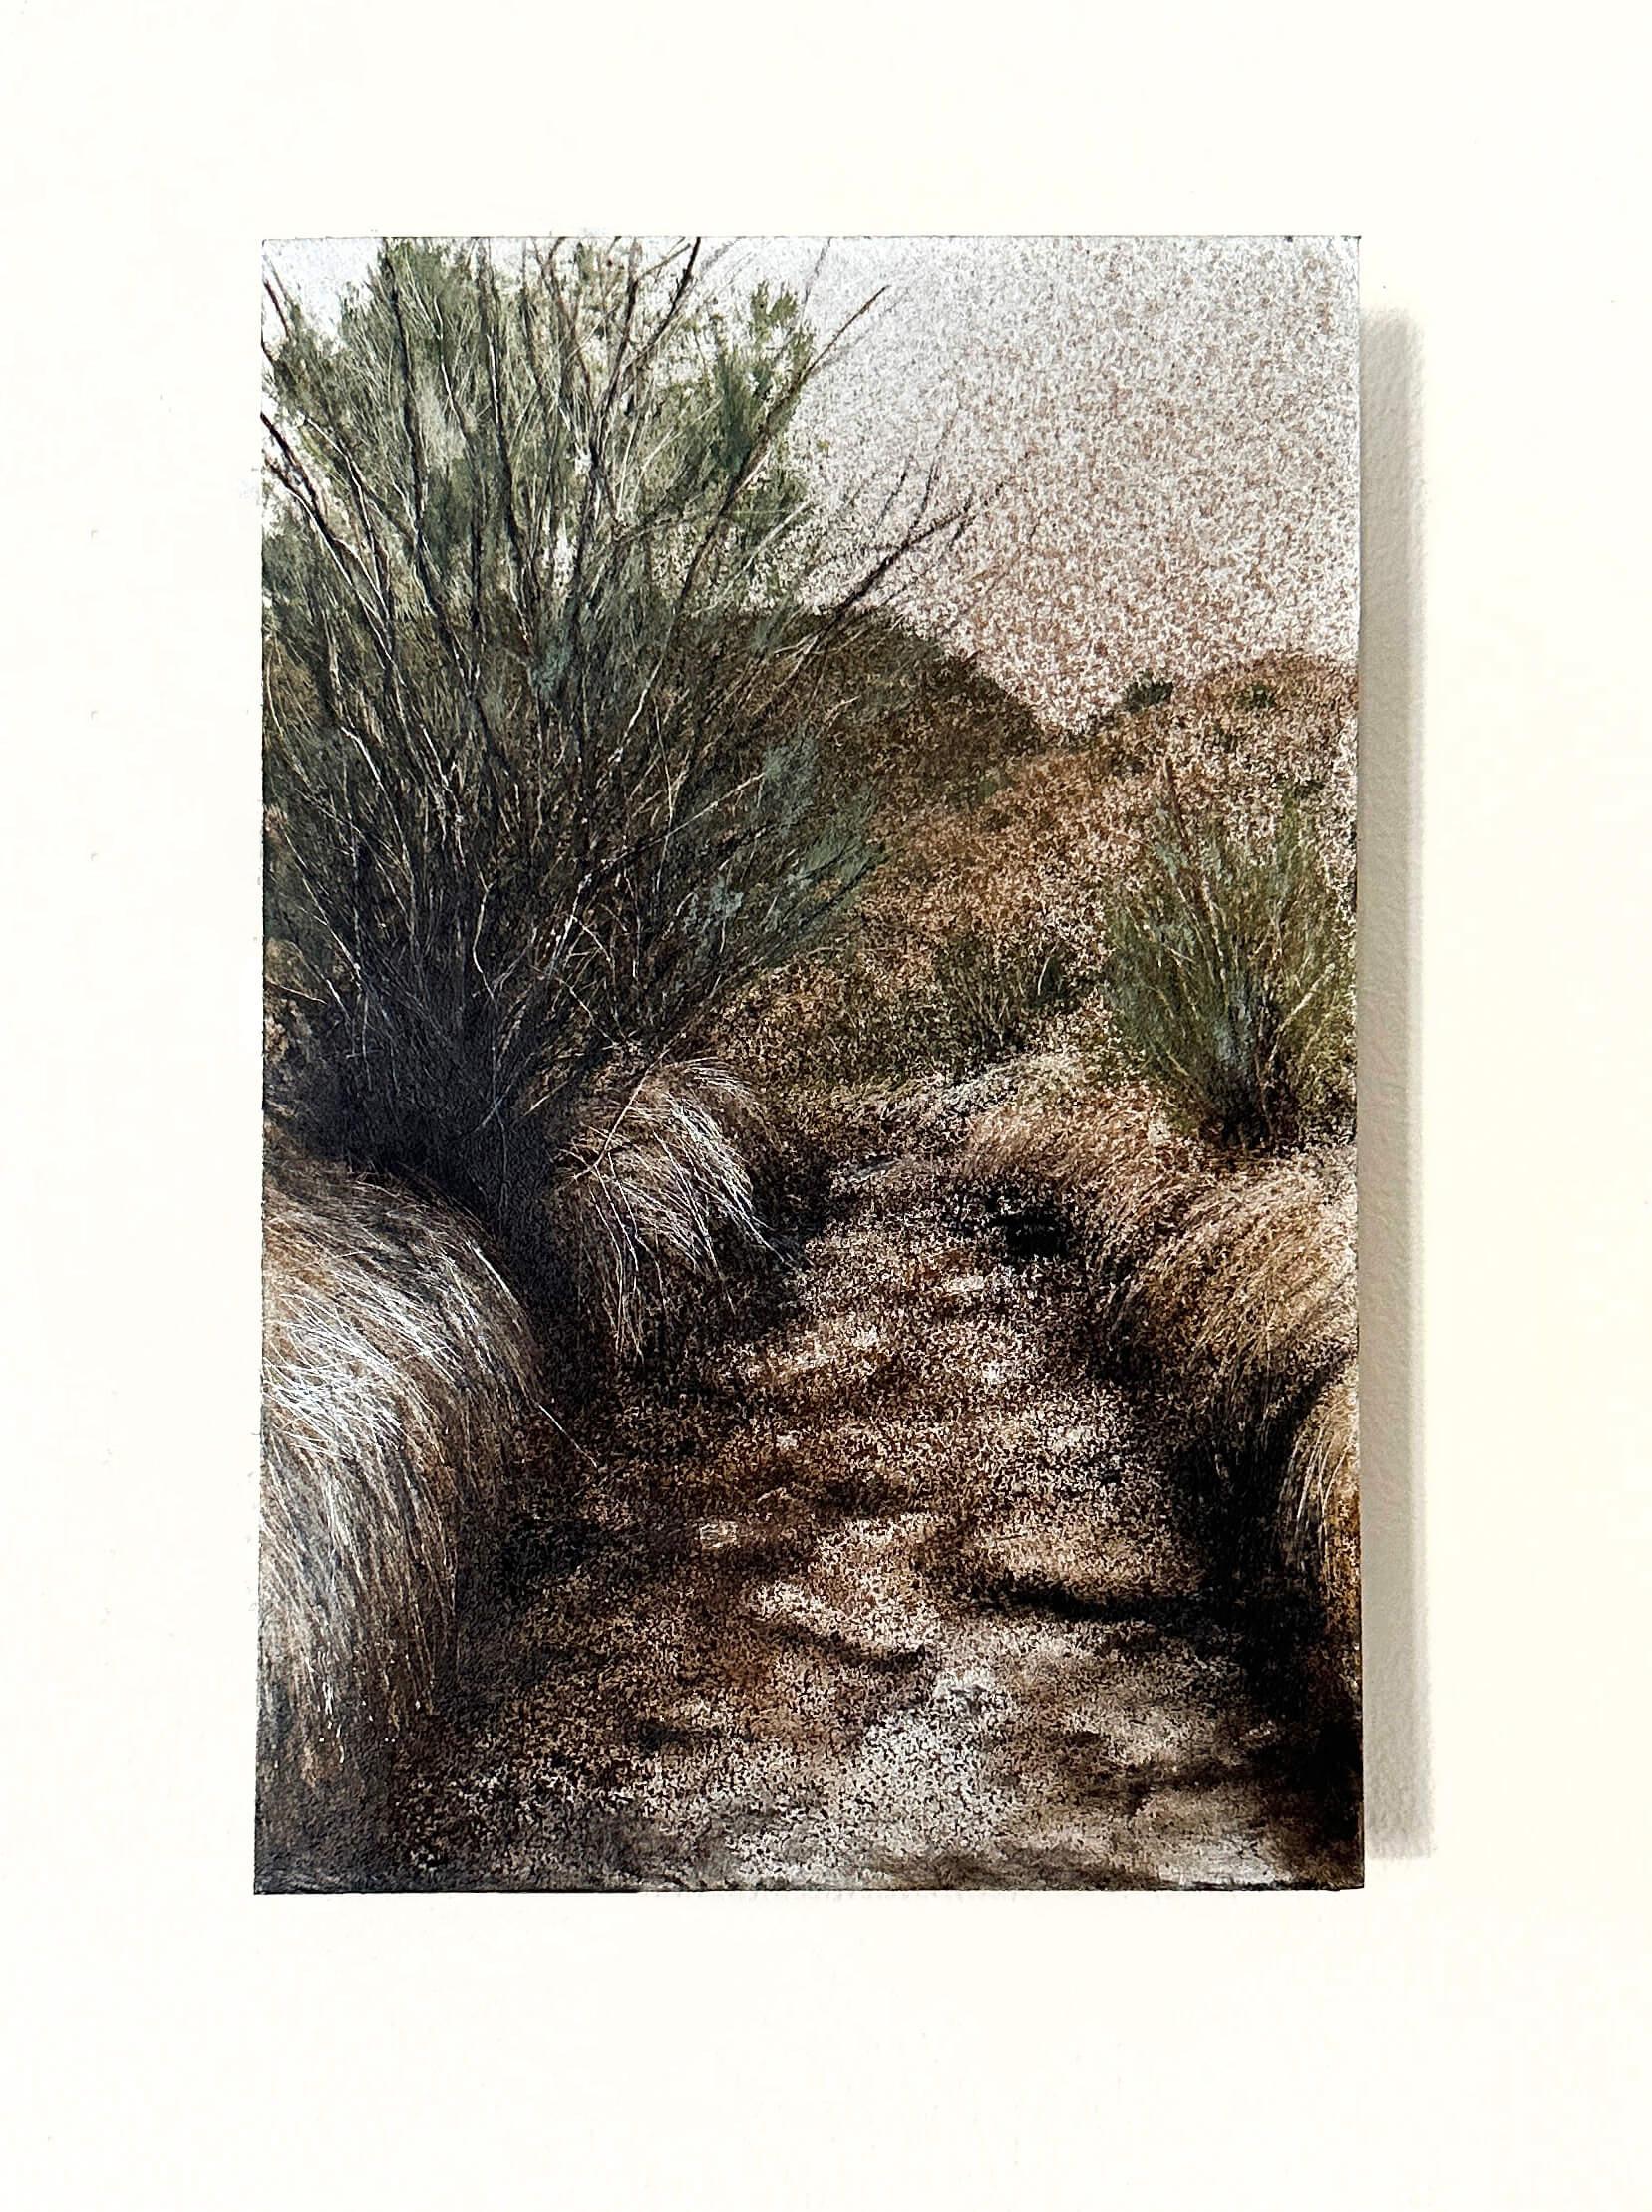 Tamarisk Invasion, Original Dirt and Oil Painting - Brown Figurative Painting by Lisa Lebofsky